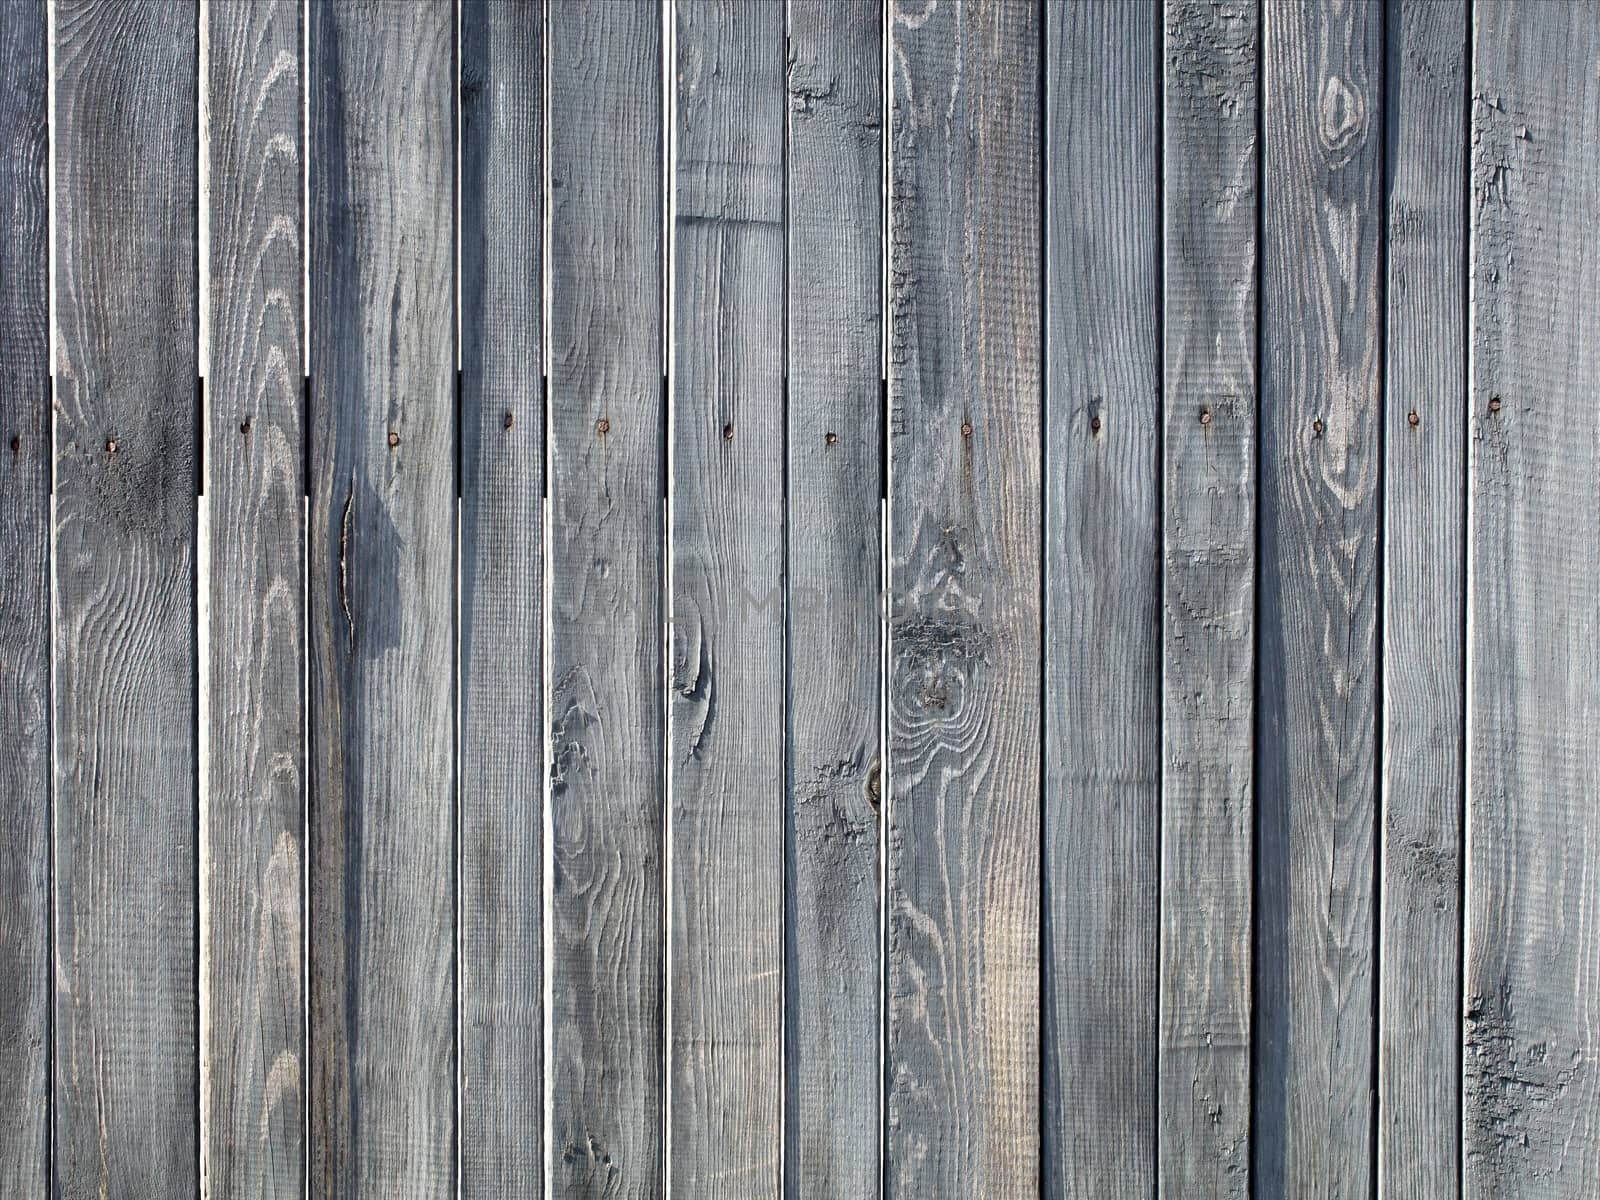 Weathered old gray wooden fence by Sergii